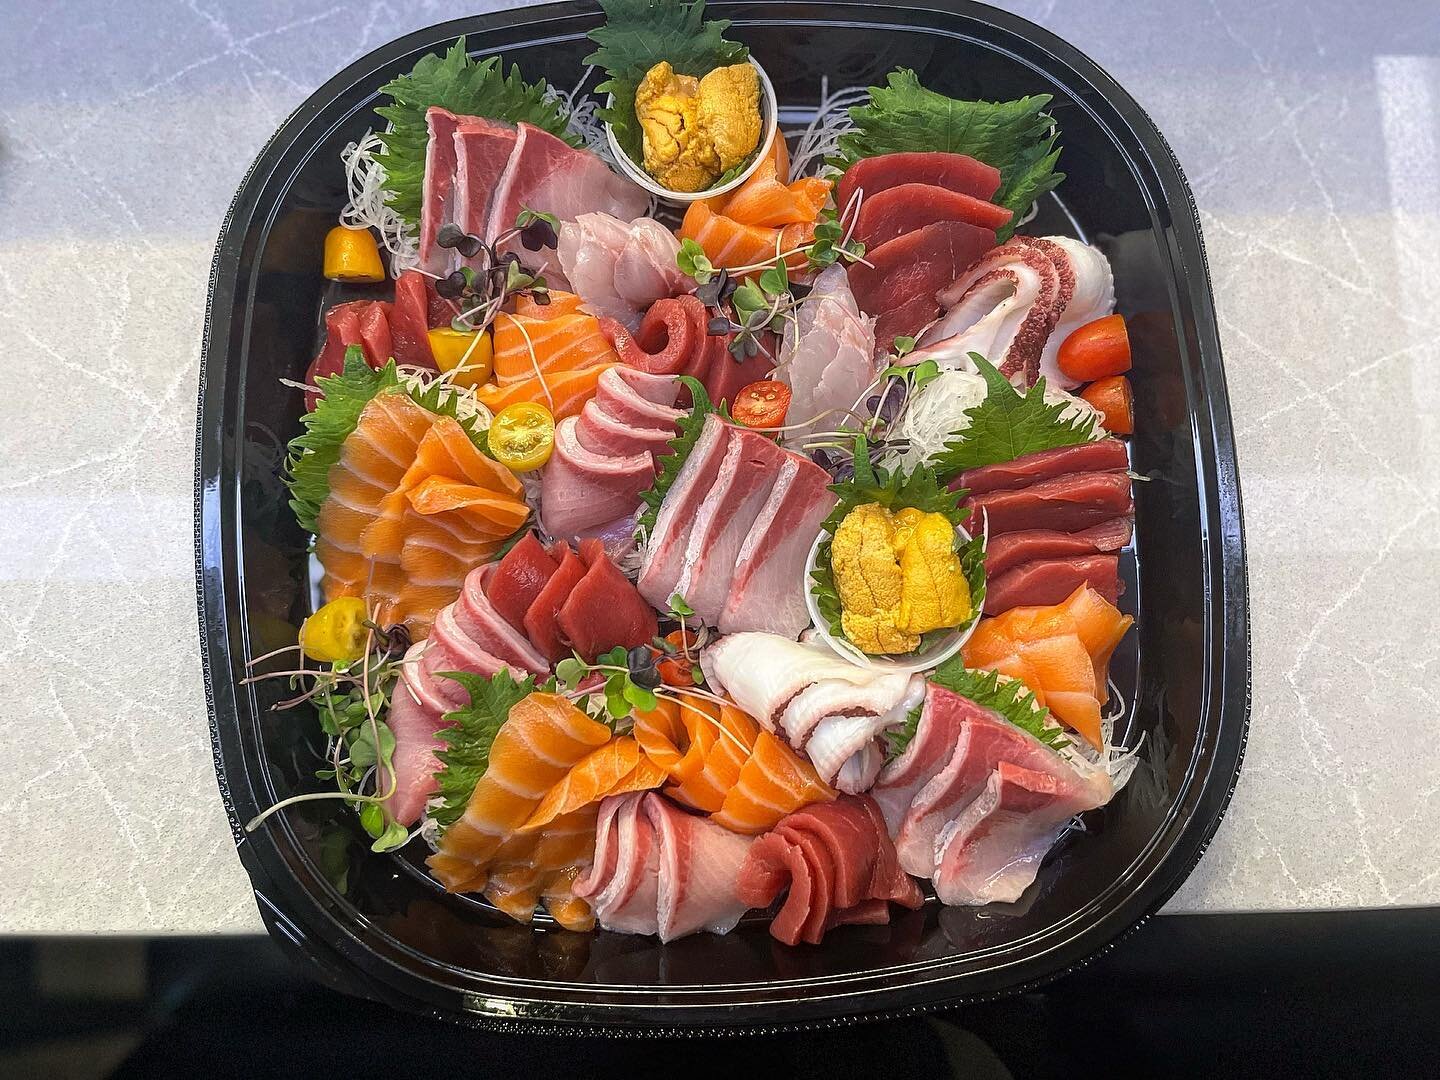 You are all fabulous, think fabulous and feel fabulous! Have a fabulous sashimi day!
.
.
.
.
.
.
.
.
#bluefineagleview #eagleviewsushi #extonsushi #eatgoodfeelgood #eatsushi #sashimilover #instagoodfood #instagoodfoodpics #instafoods #instapicture